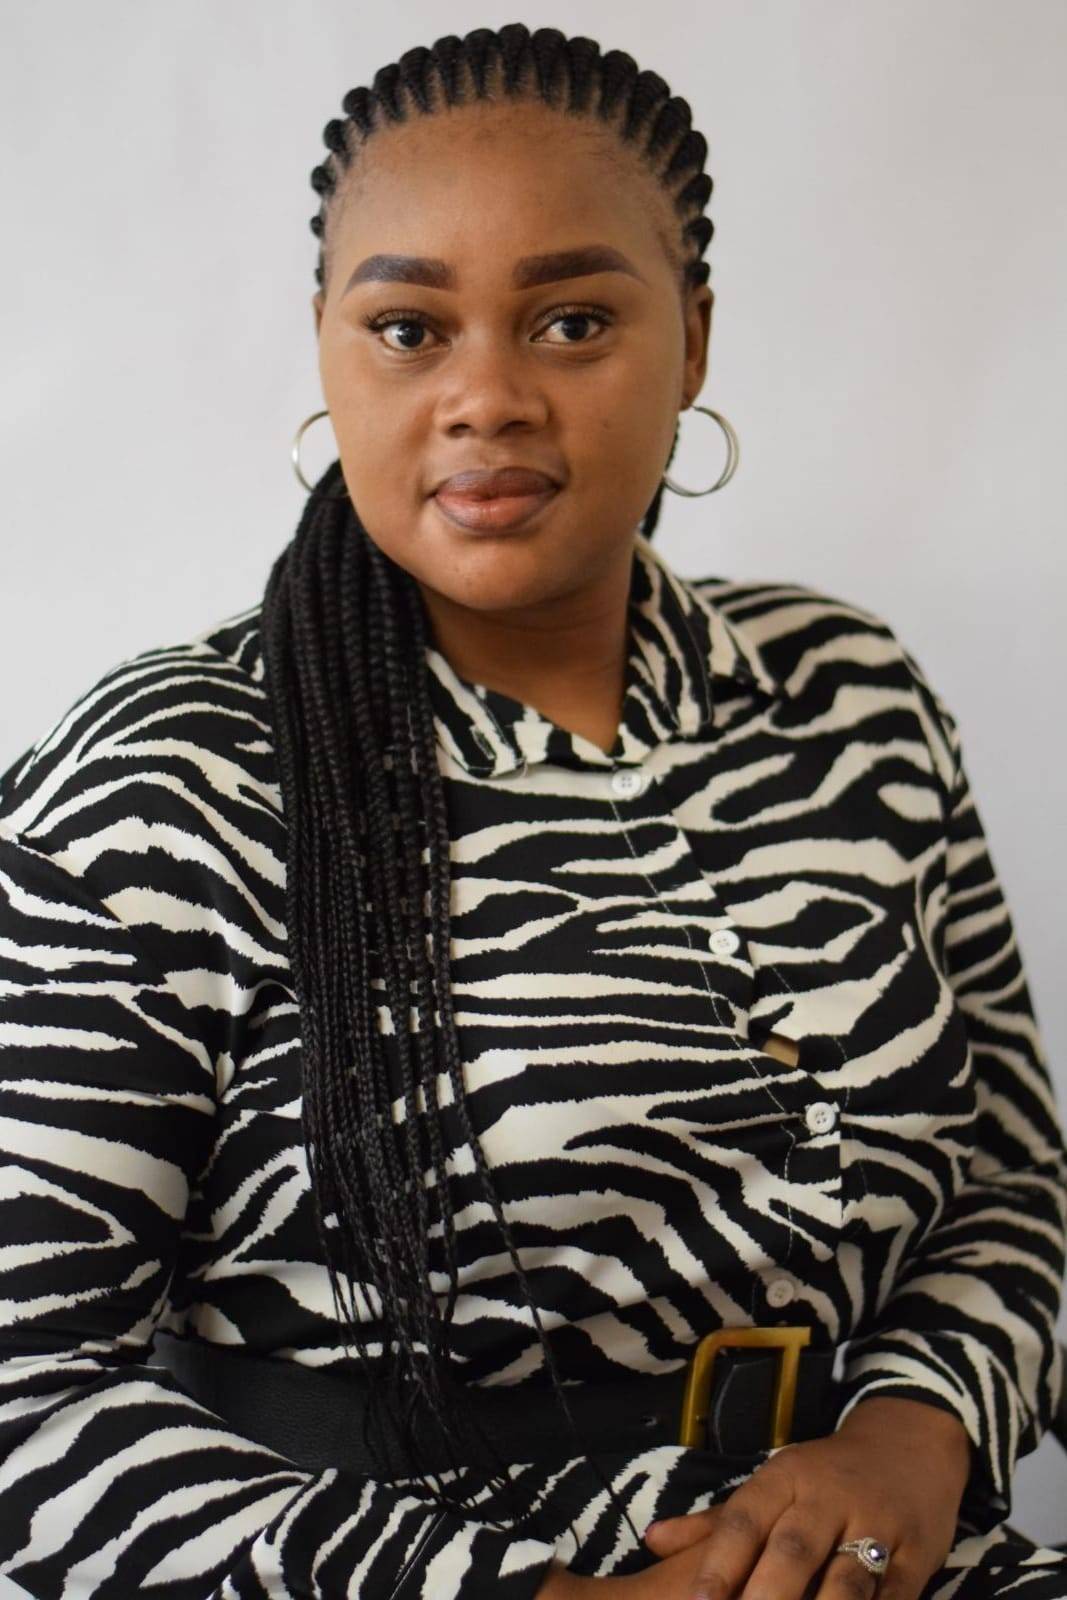 MEET SERGEANT NOMBI PETER , AN INVESTIGATOR AT MANGAUNG FCS – SHE PLACED 31 RAPISTS BEHIND BARS WITH A COLLECTIVE NUMBER OF 5 LIFE TERMS AND 305 YEARS’ IMPRISONMENT